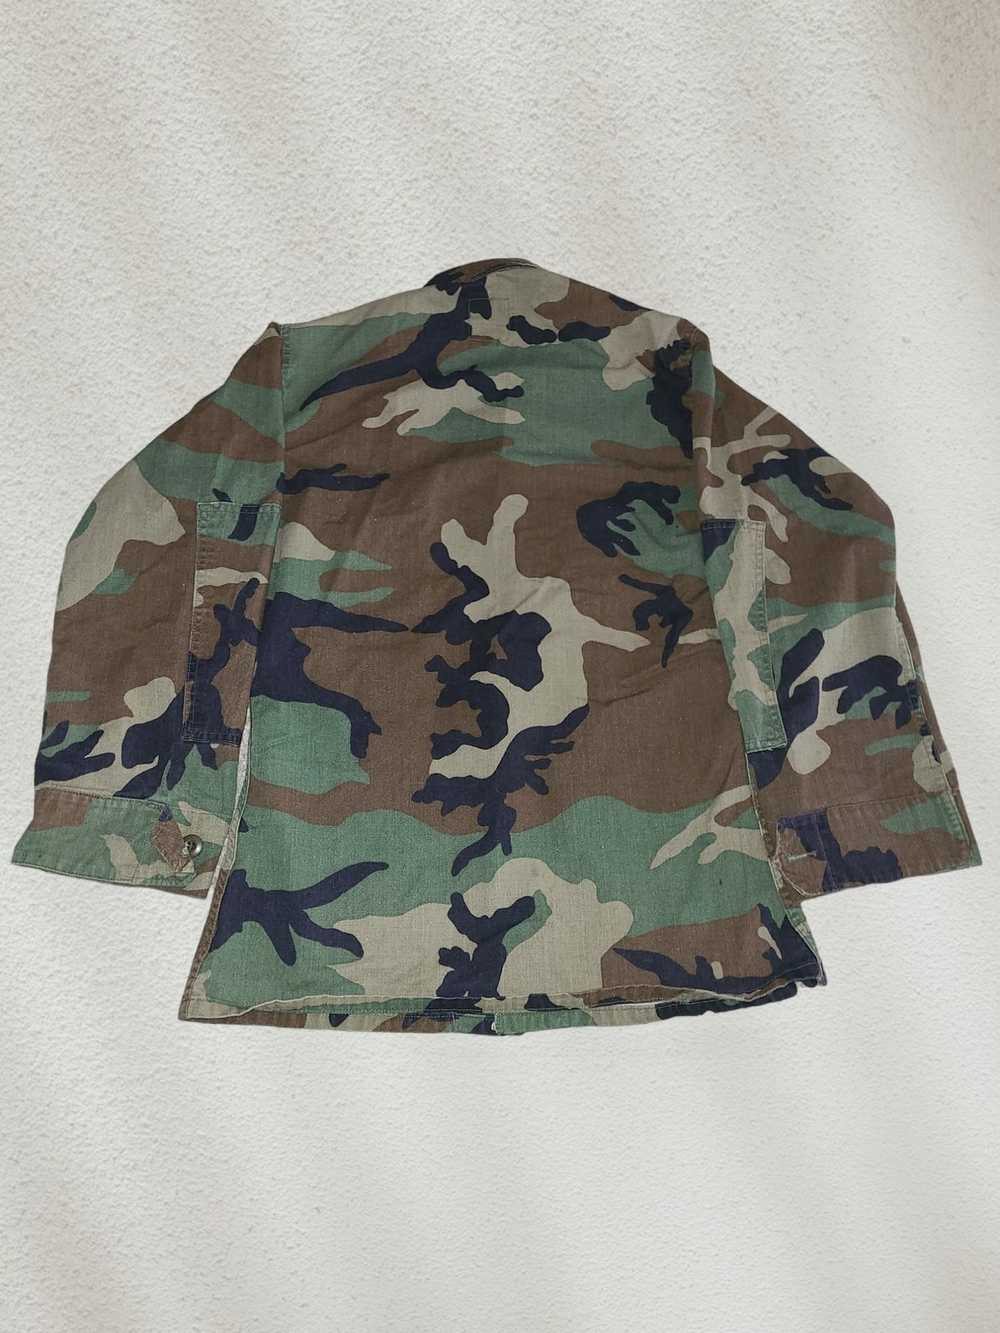 American Apparel Women's US army woodland camoufl… - image 4